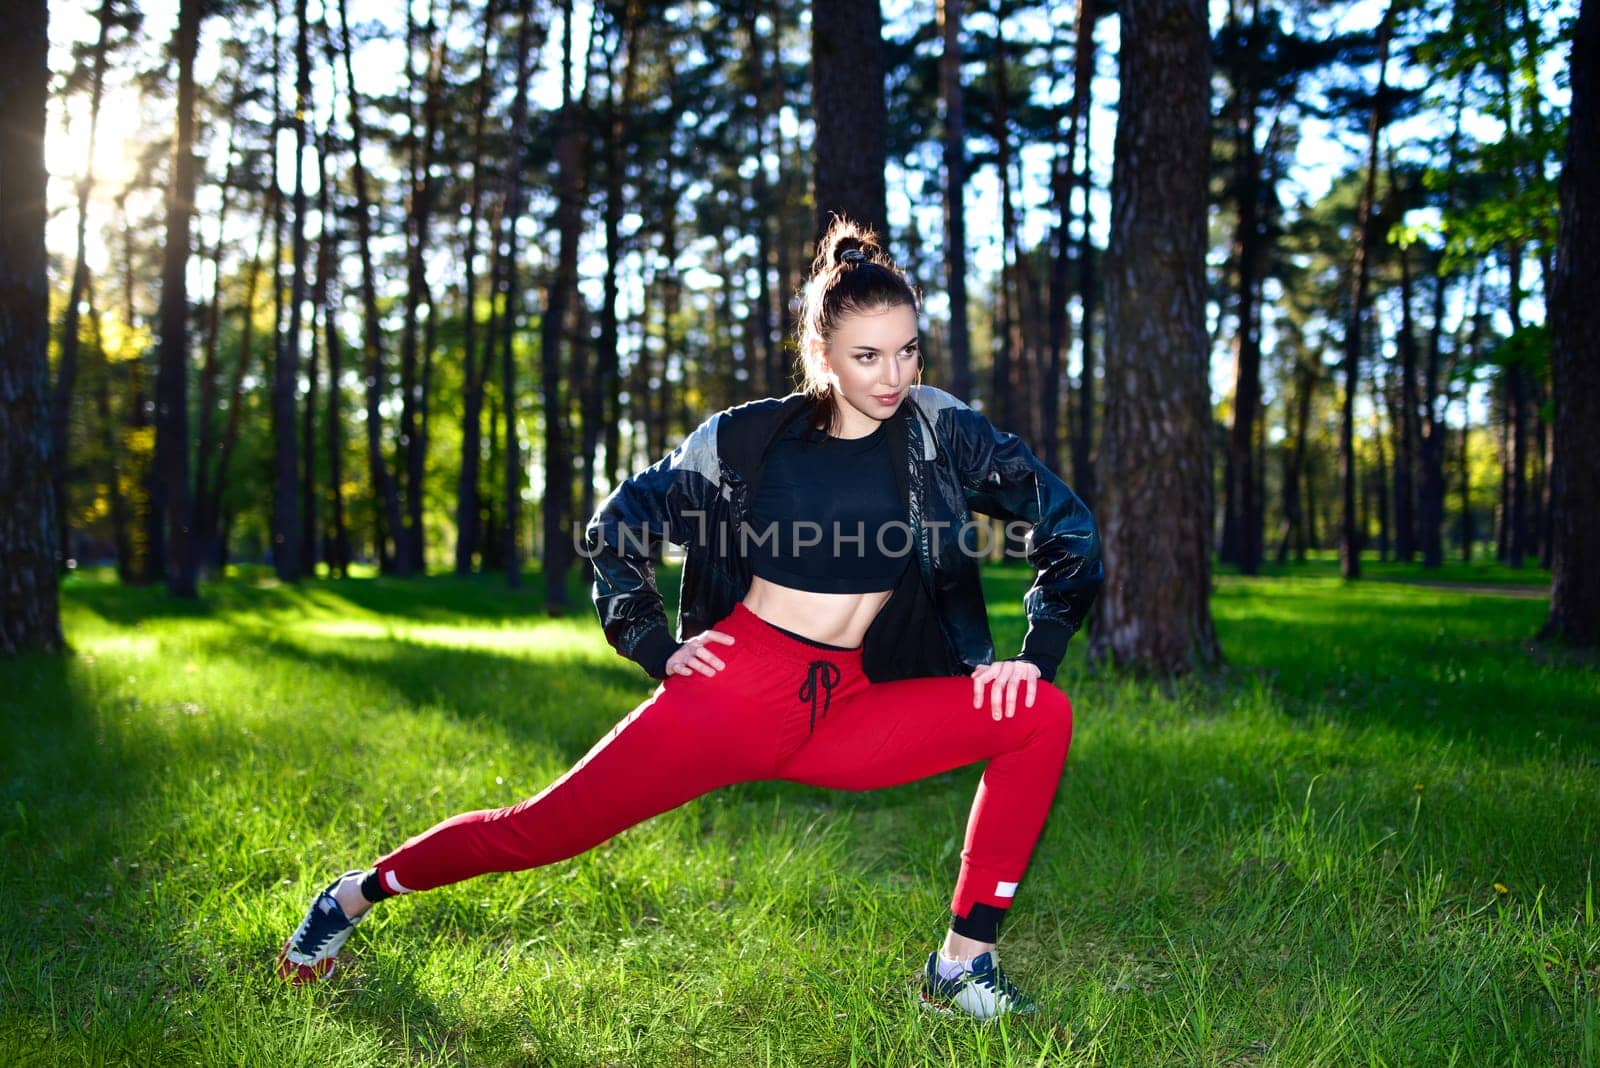 Woman in red workout pants stretching outdoors in a forest. Exercising in nature.